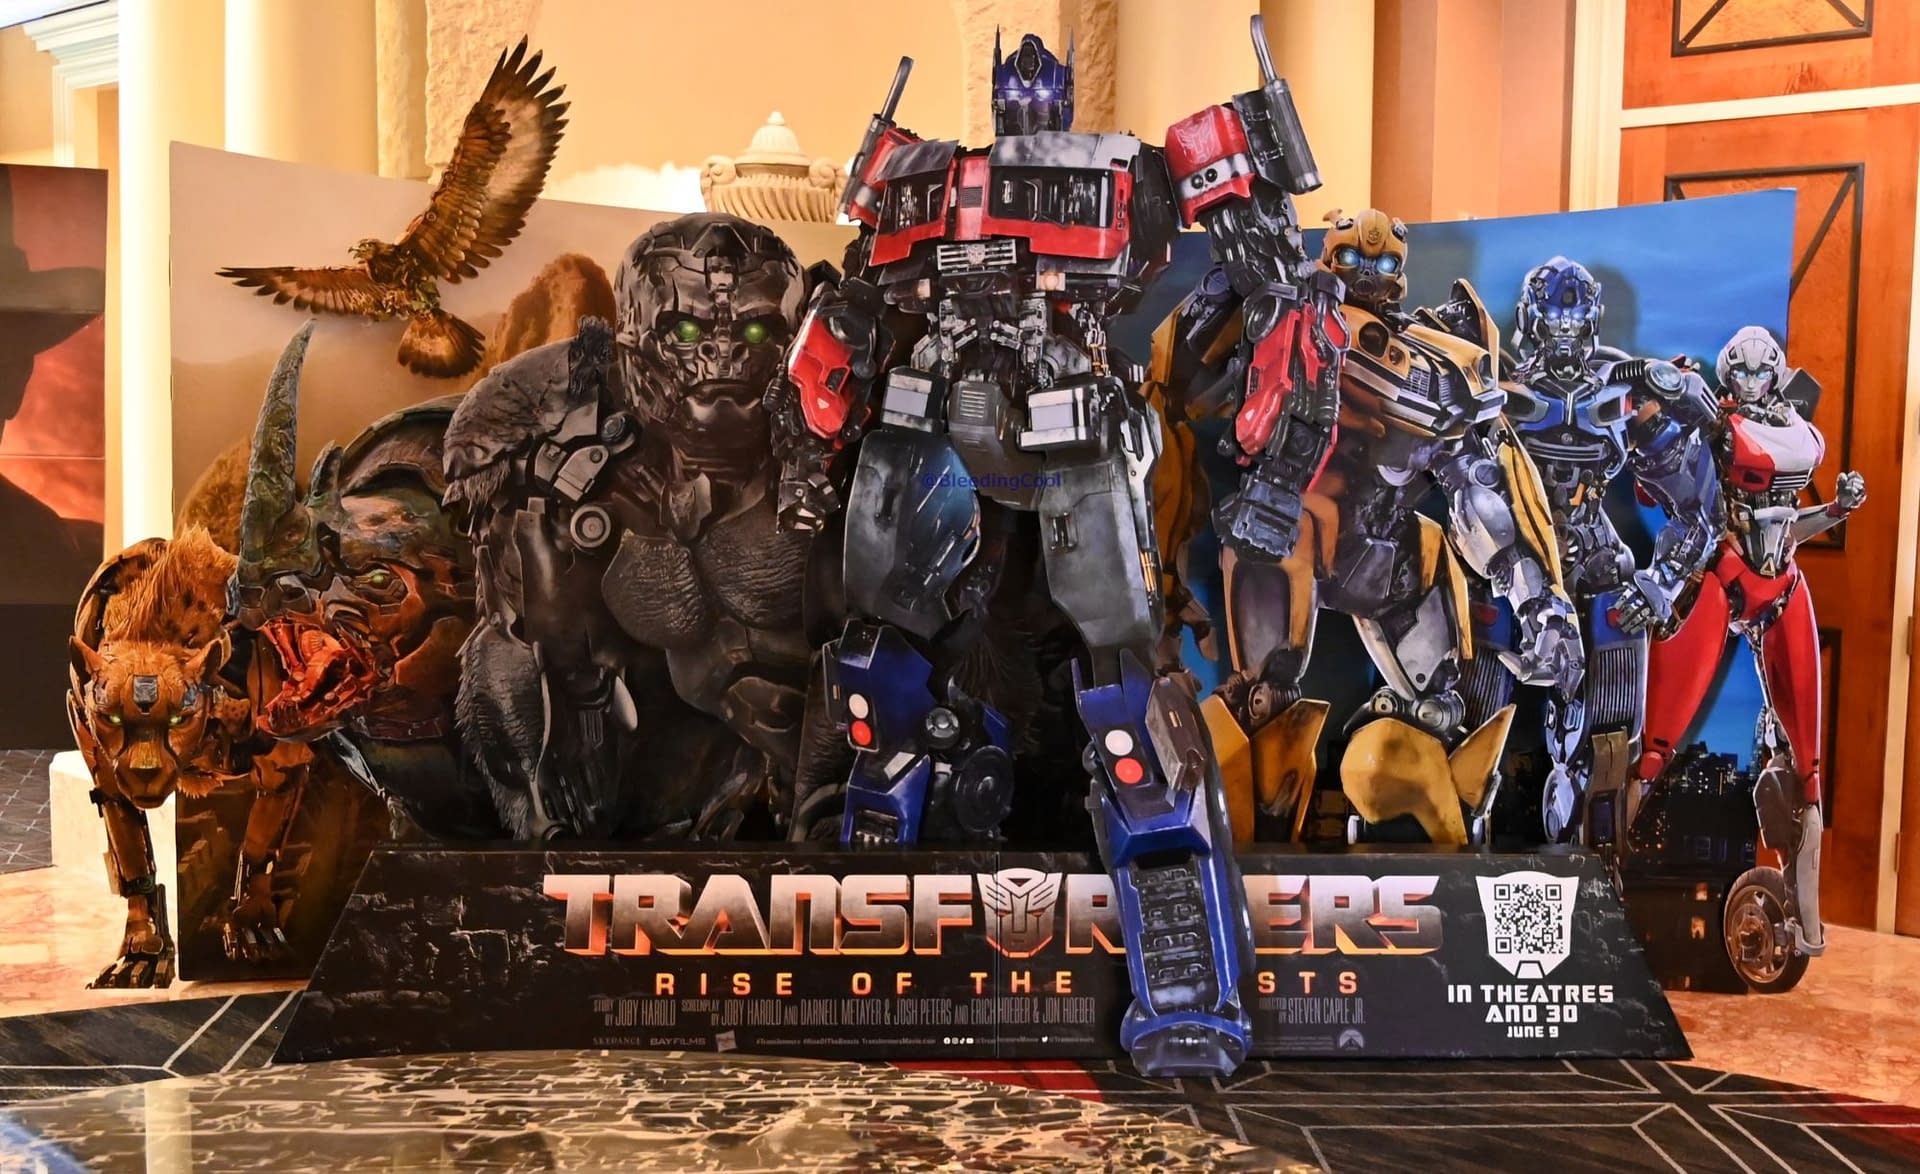 Transformers: Rise Of The Beasts Posters On Display